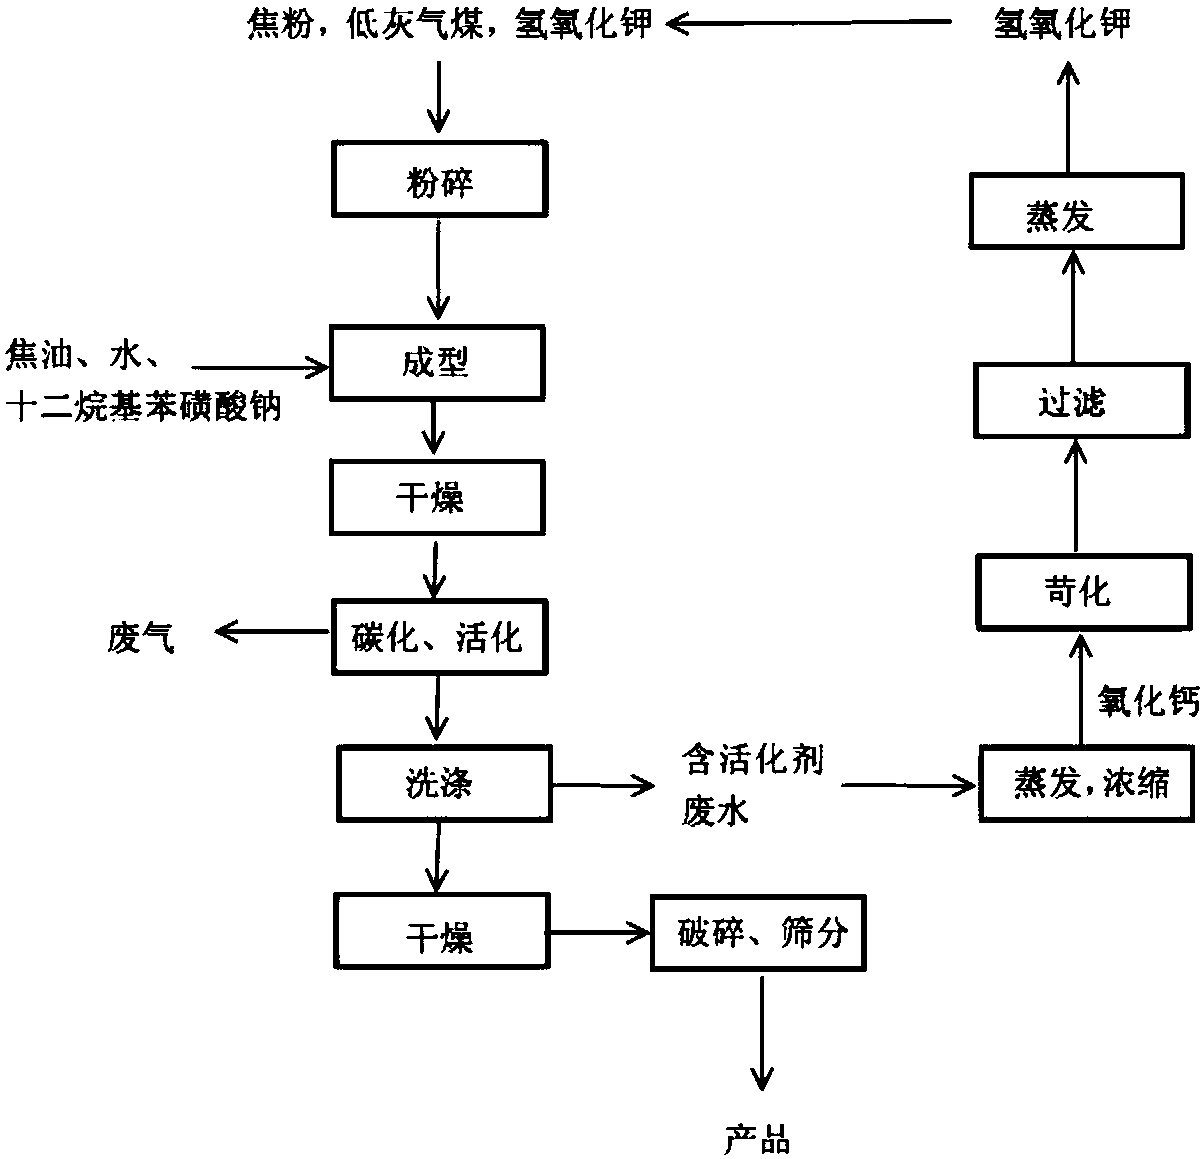 Method for preparing high-specific-surface-area activated carbon from blend coal of coke powder and/or quenched coke powder